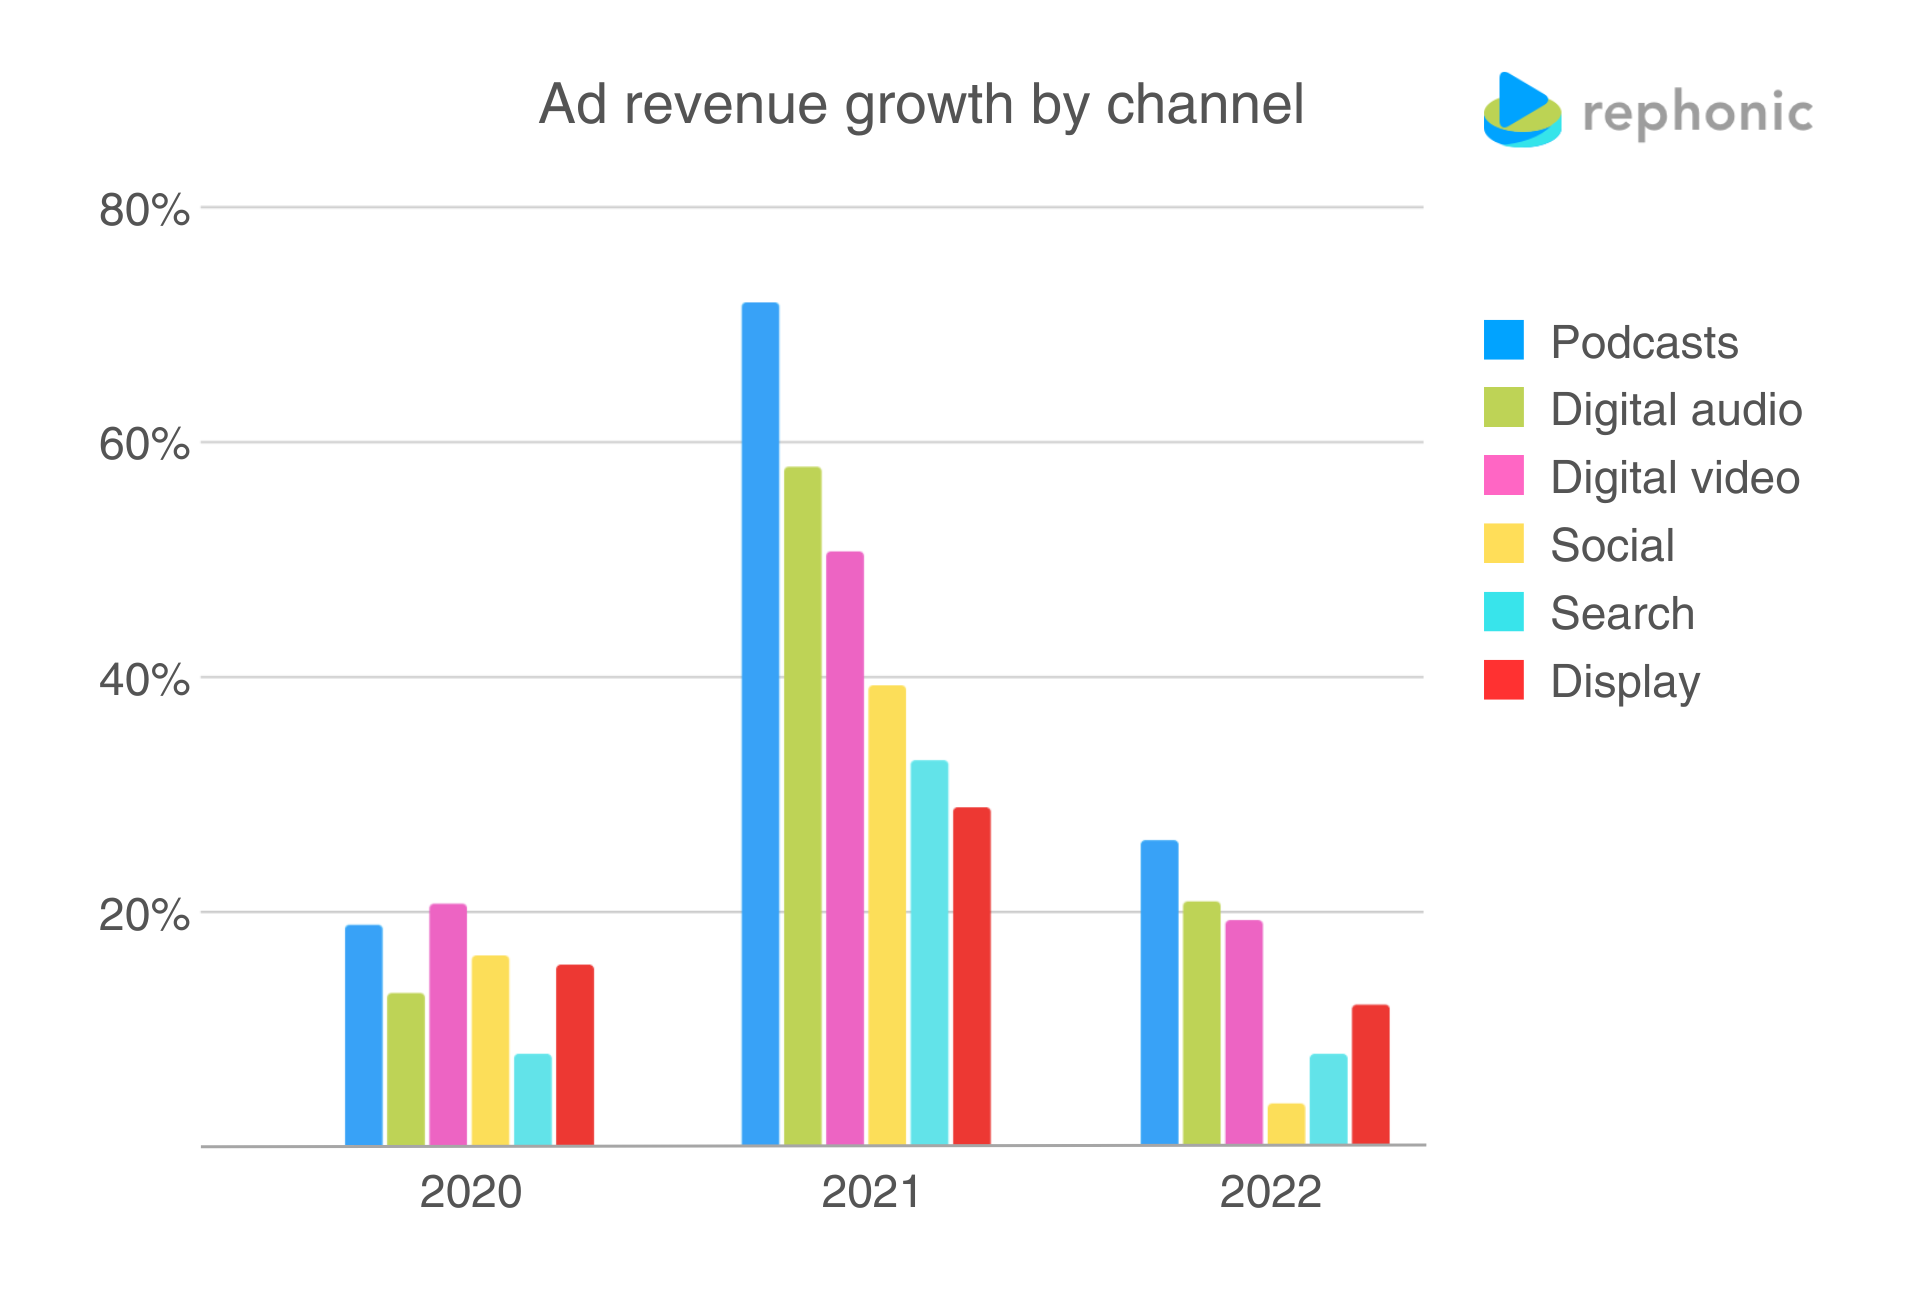 US ad revenue growth by channel